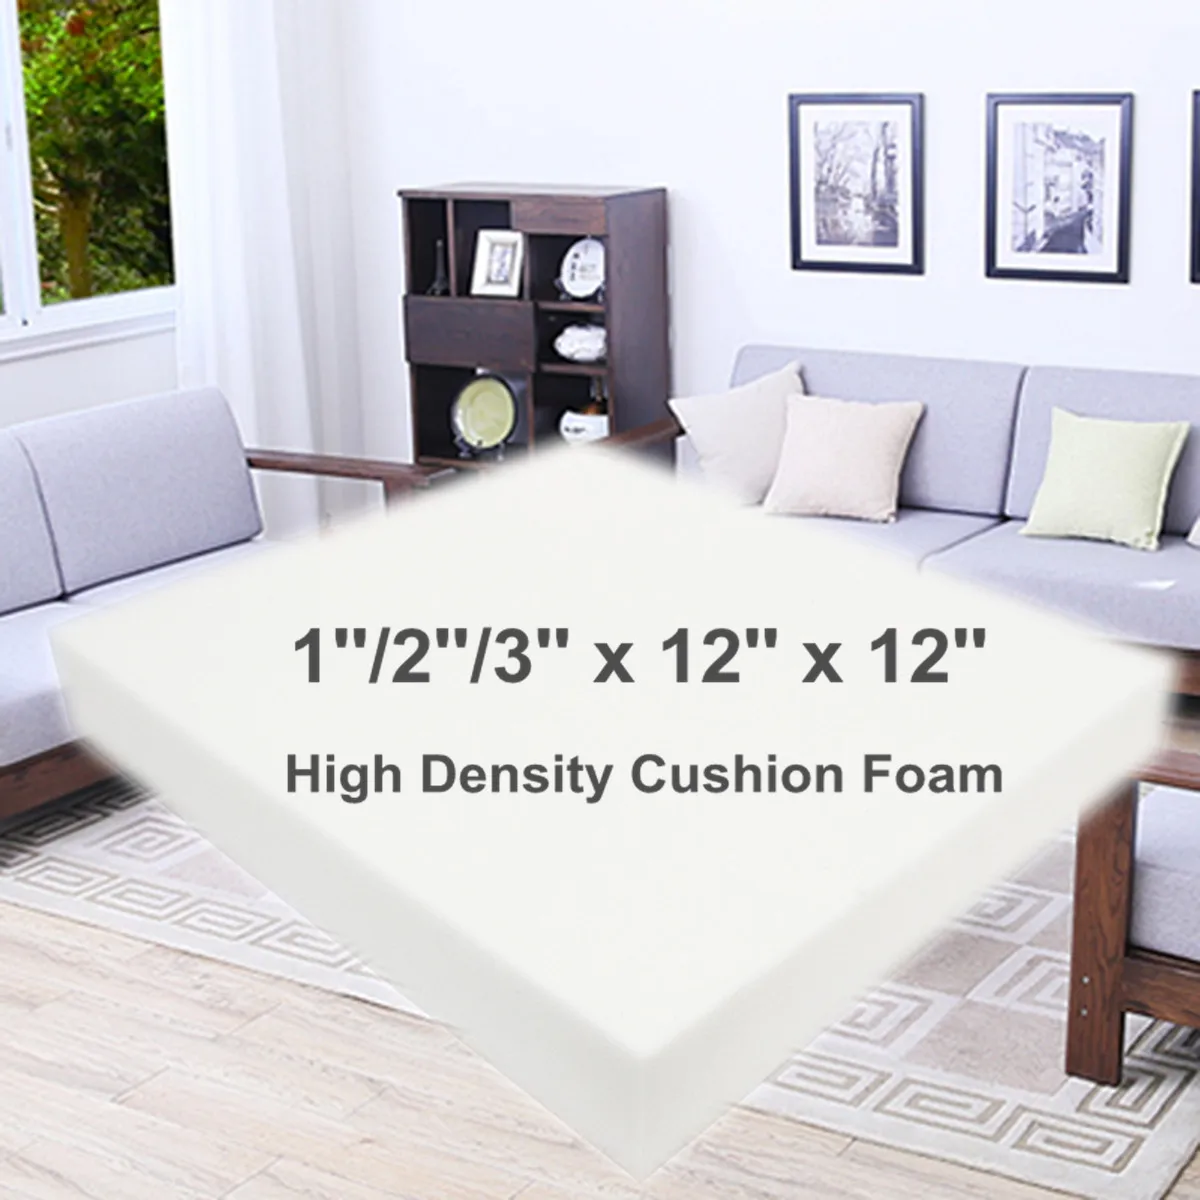 Square High Density Seat Foam White Cushion Sheet Upholstery Replacement Pad High Density Premium Chair Cushion Seat Pad 12 Inch